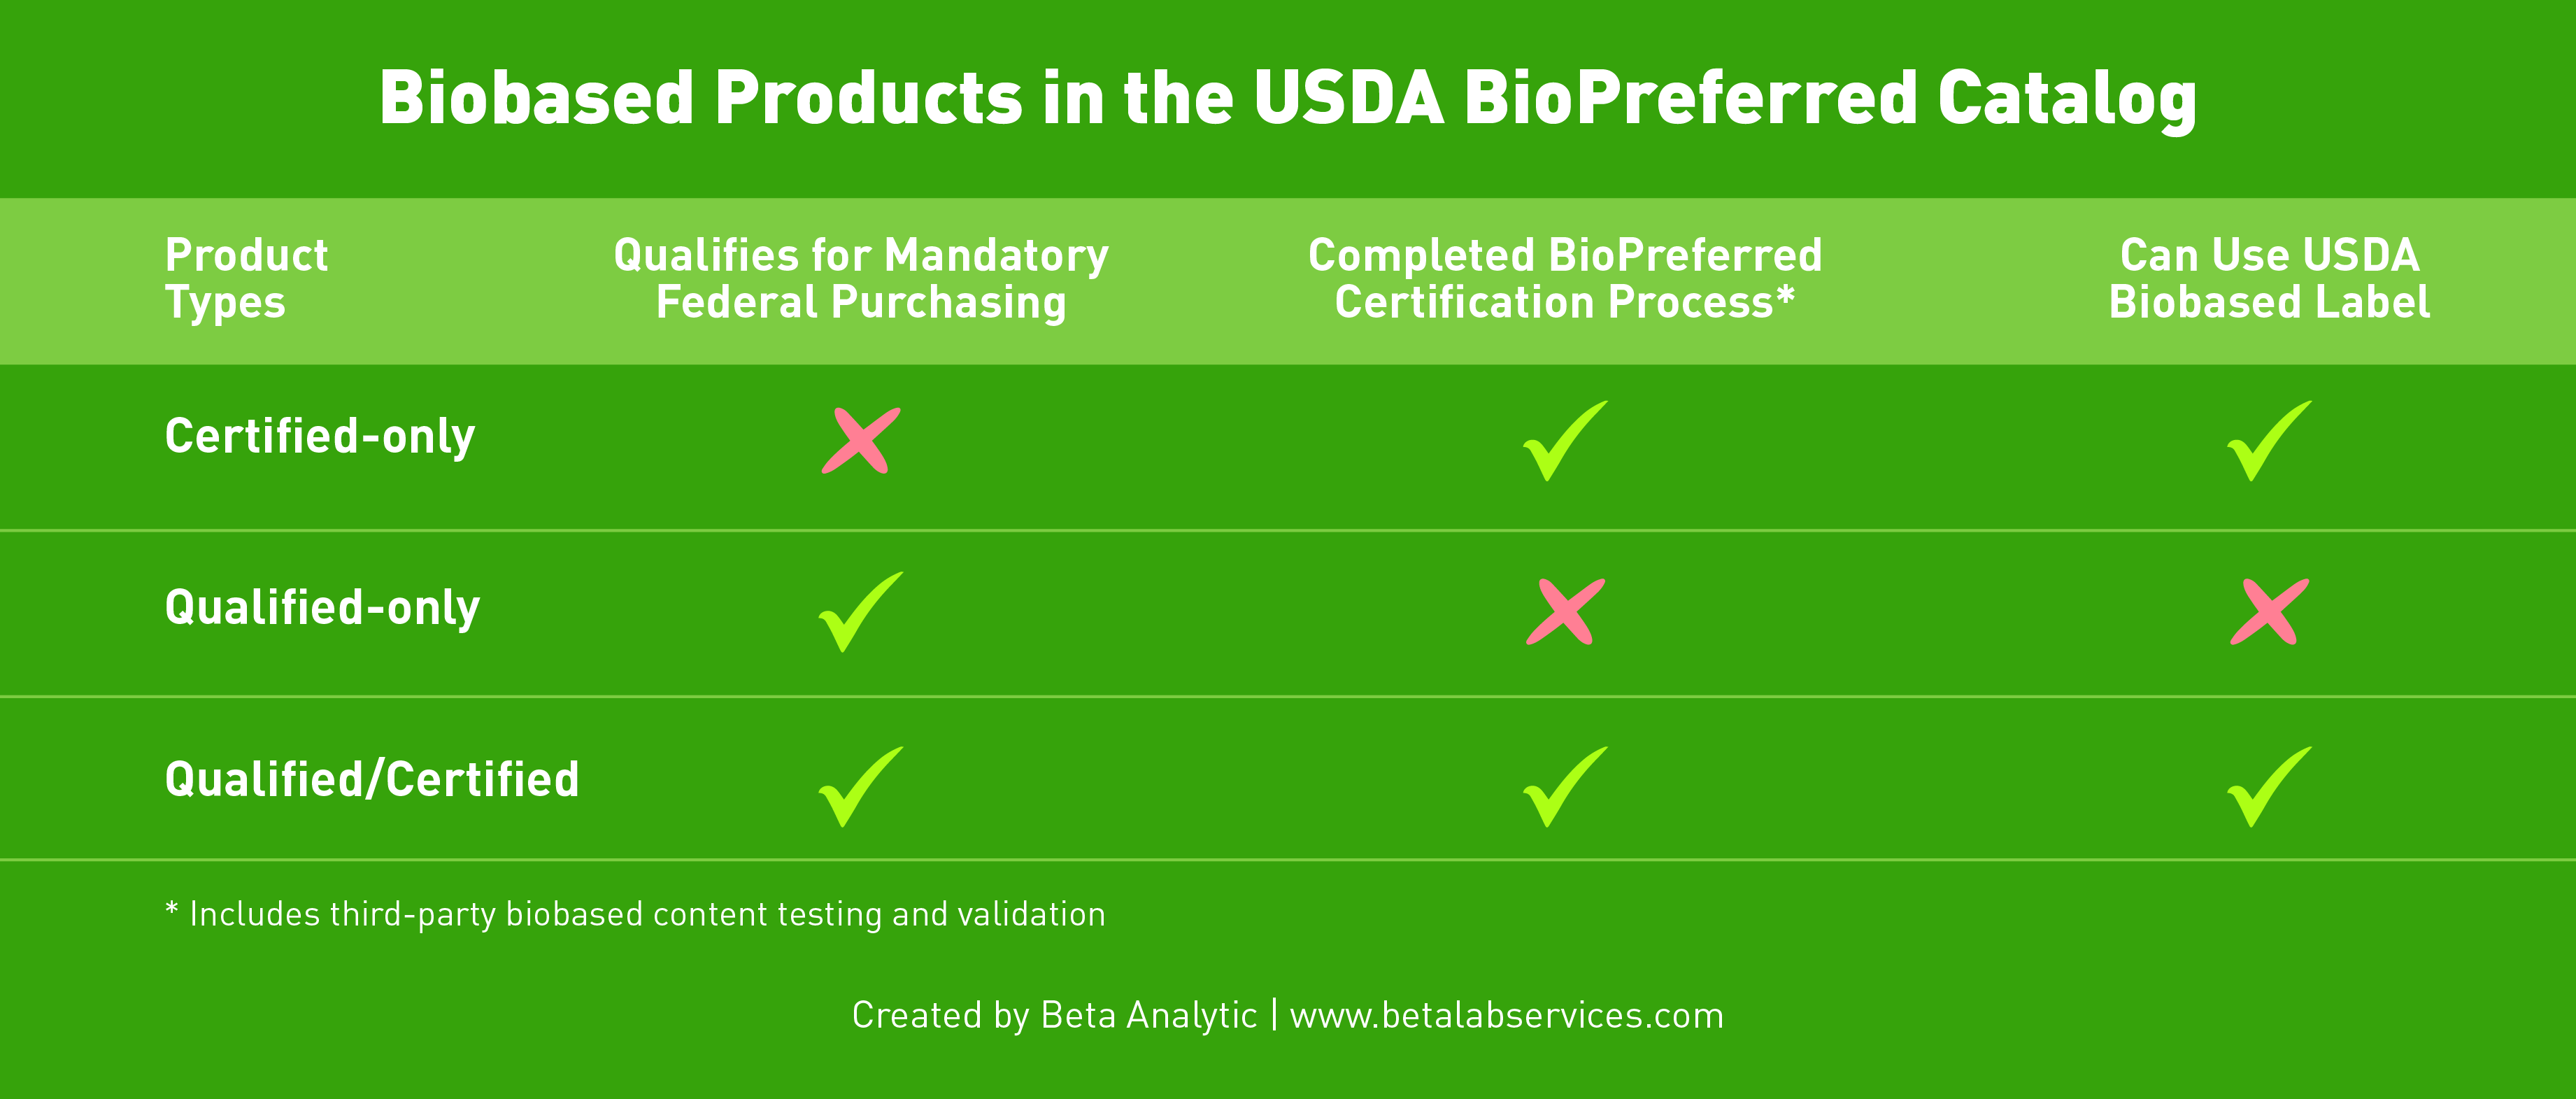 biobased_products_in_the_usda_biopreferred_catalog